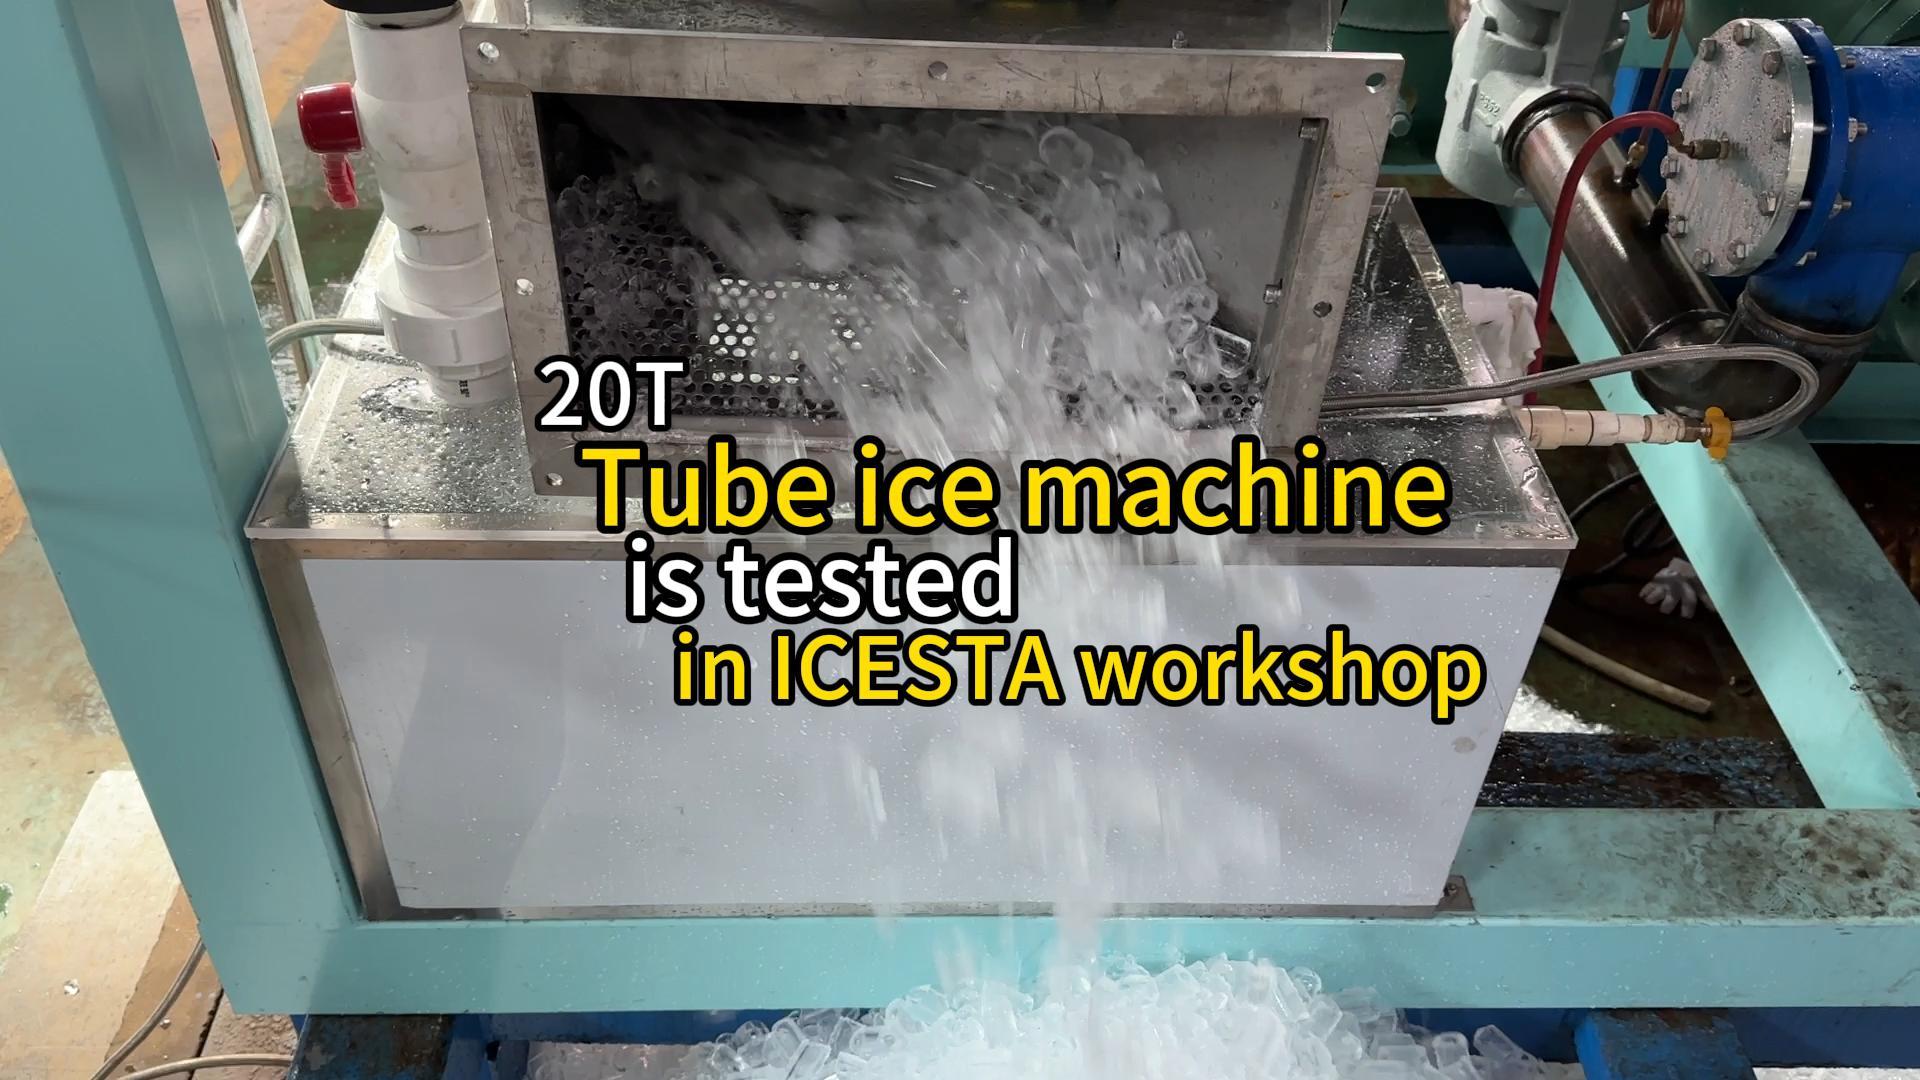 20t tube ice machine is tested in ICESTA workshop...